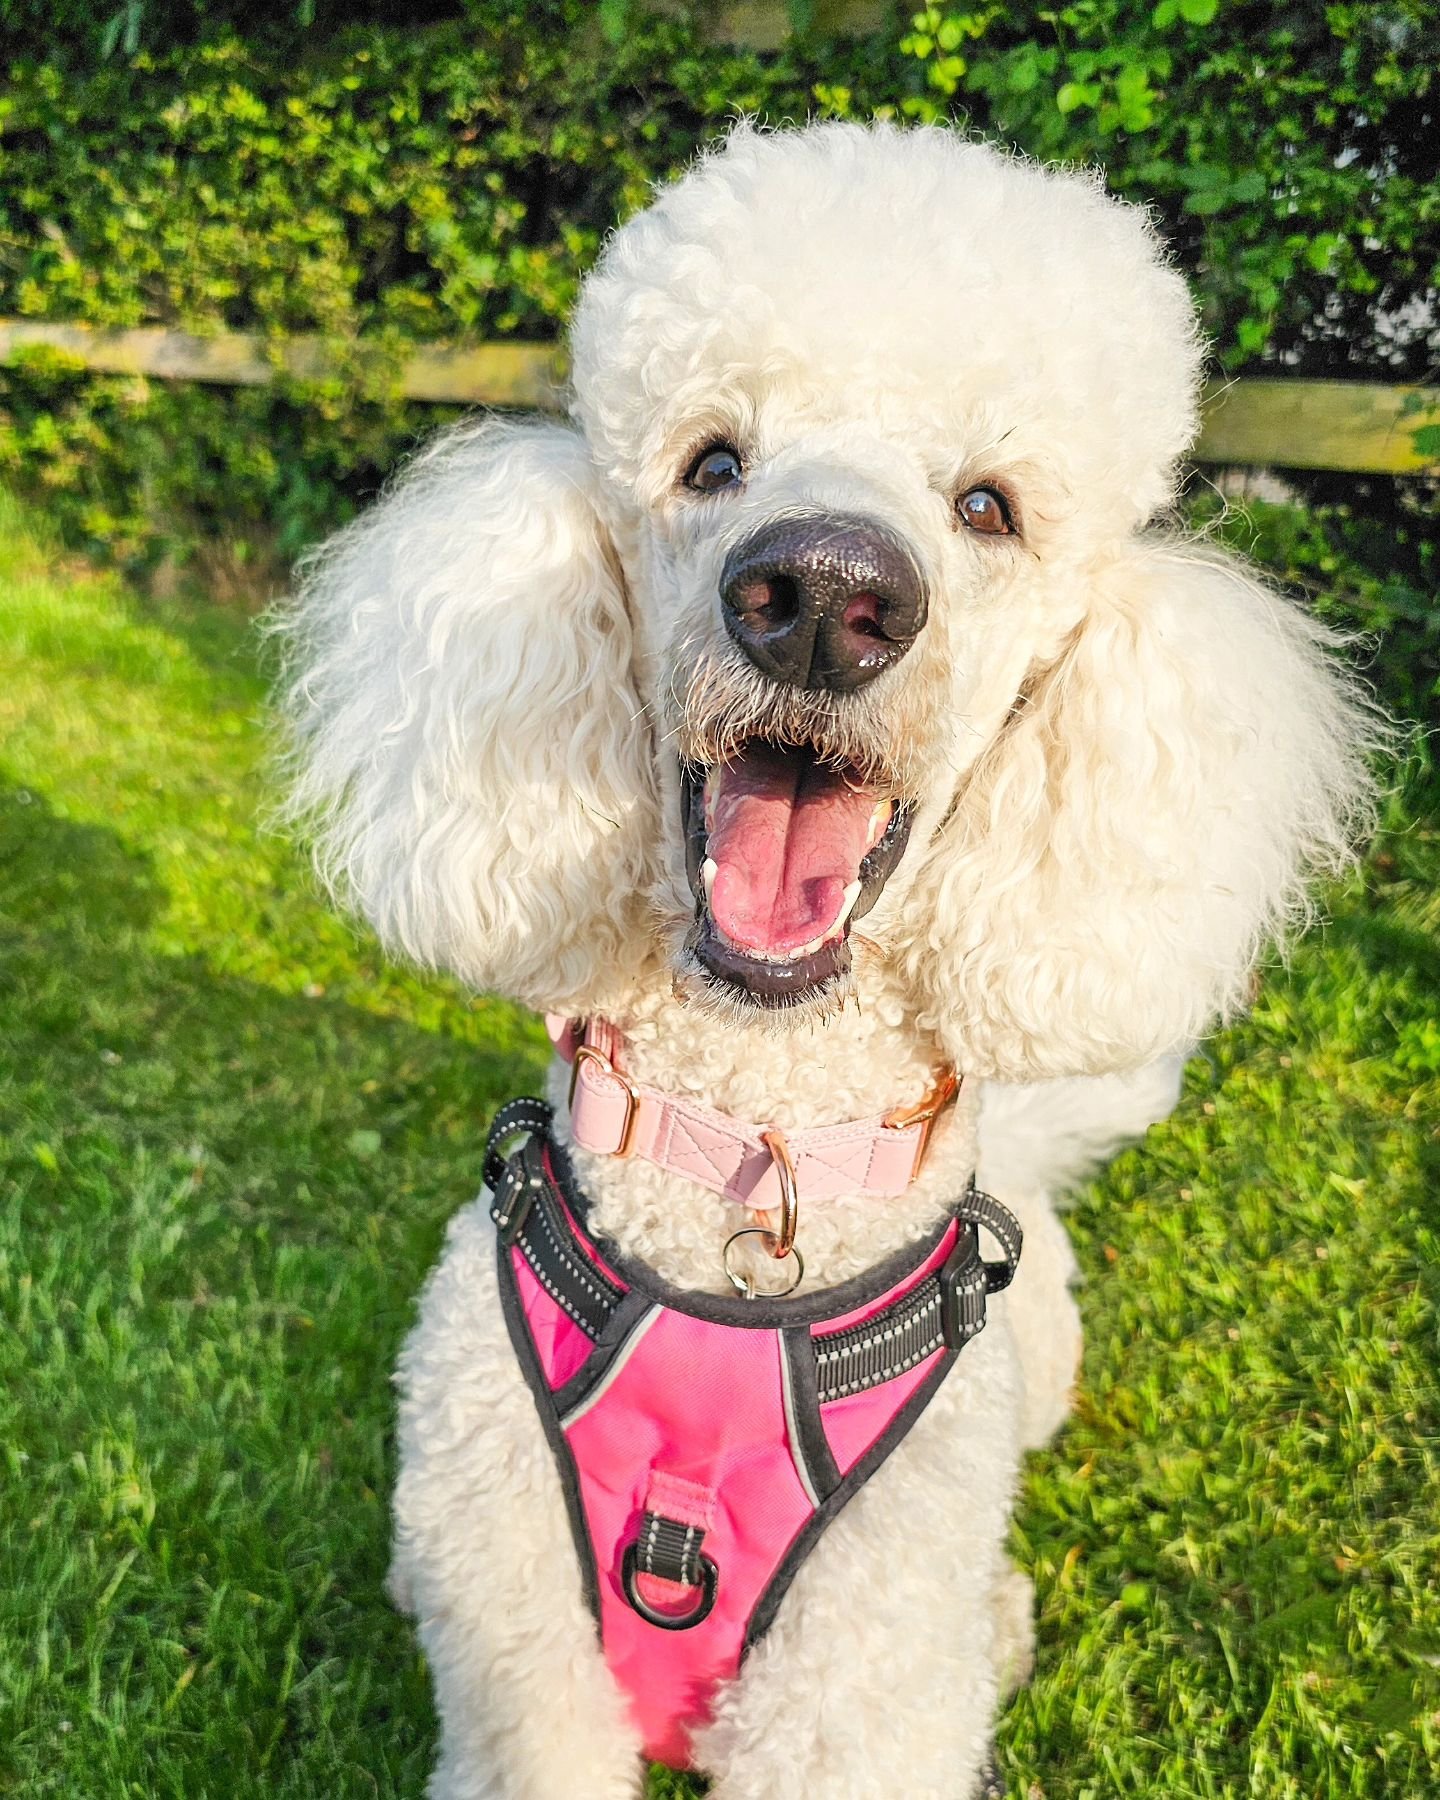 Happiness is training in the evening sunshine and learning that scary things aren't so scary anymore 🥰 It's good to have Melody back in full fitness after her recent op and cracking on with helping her feel happier about life outdoors. She did absol